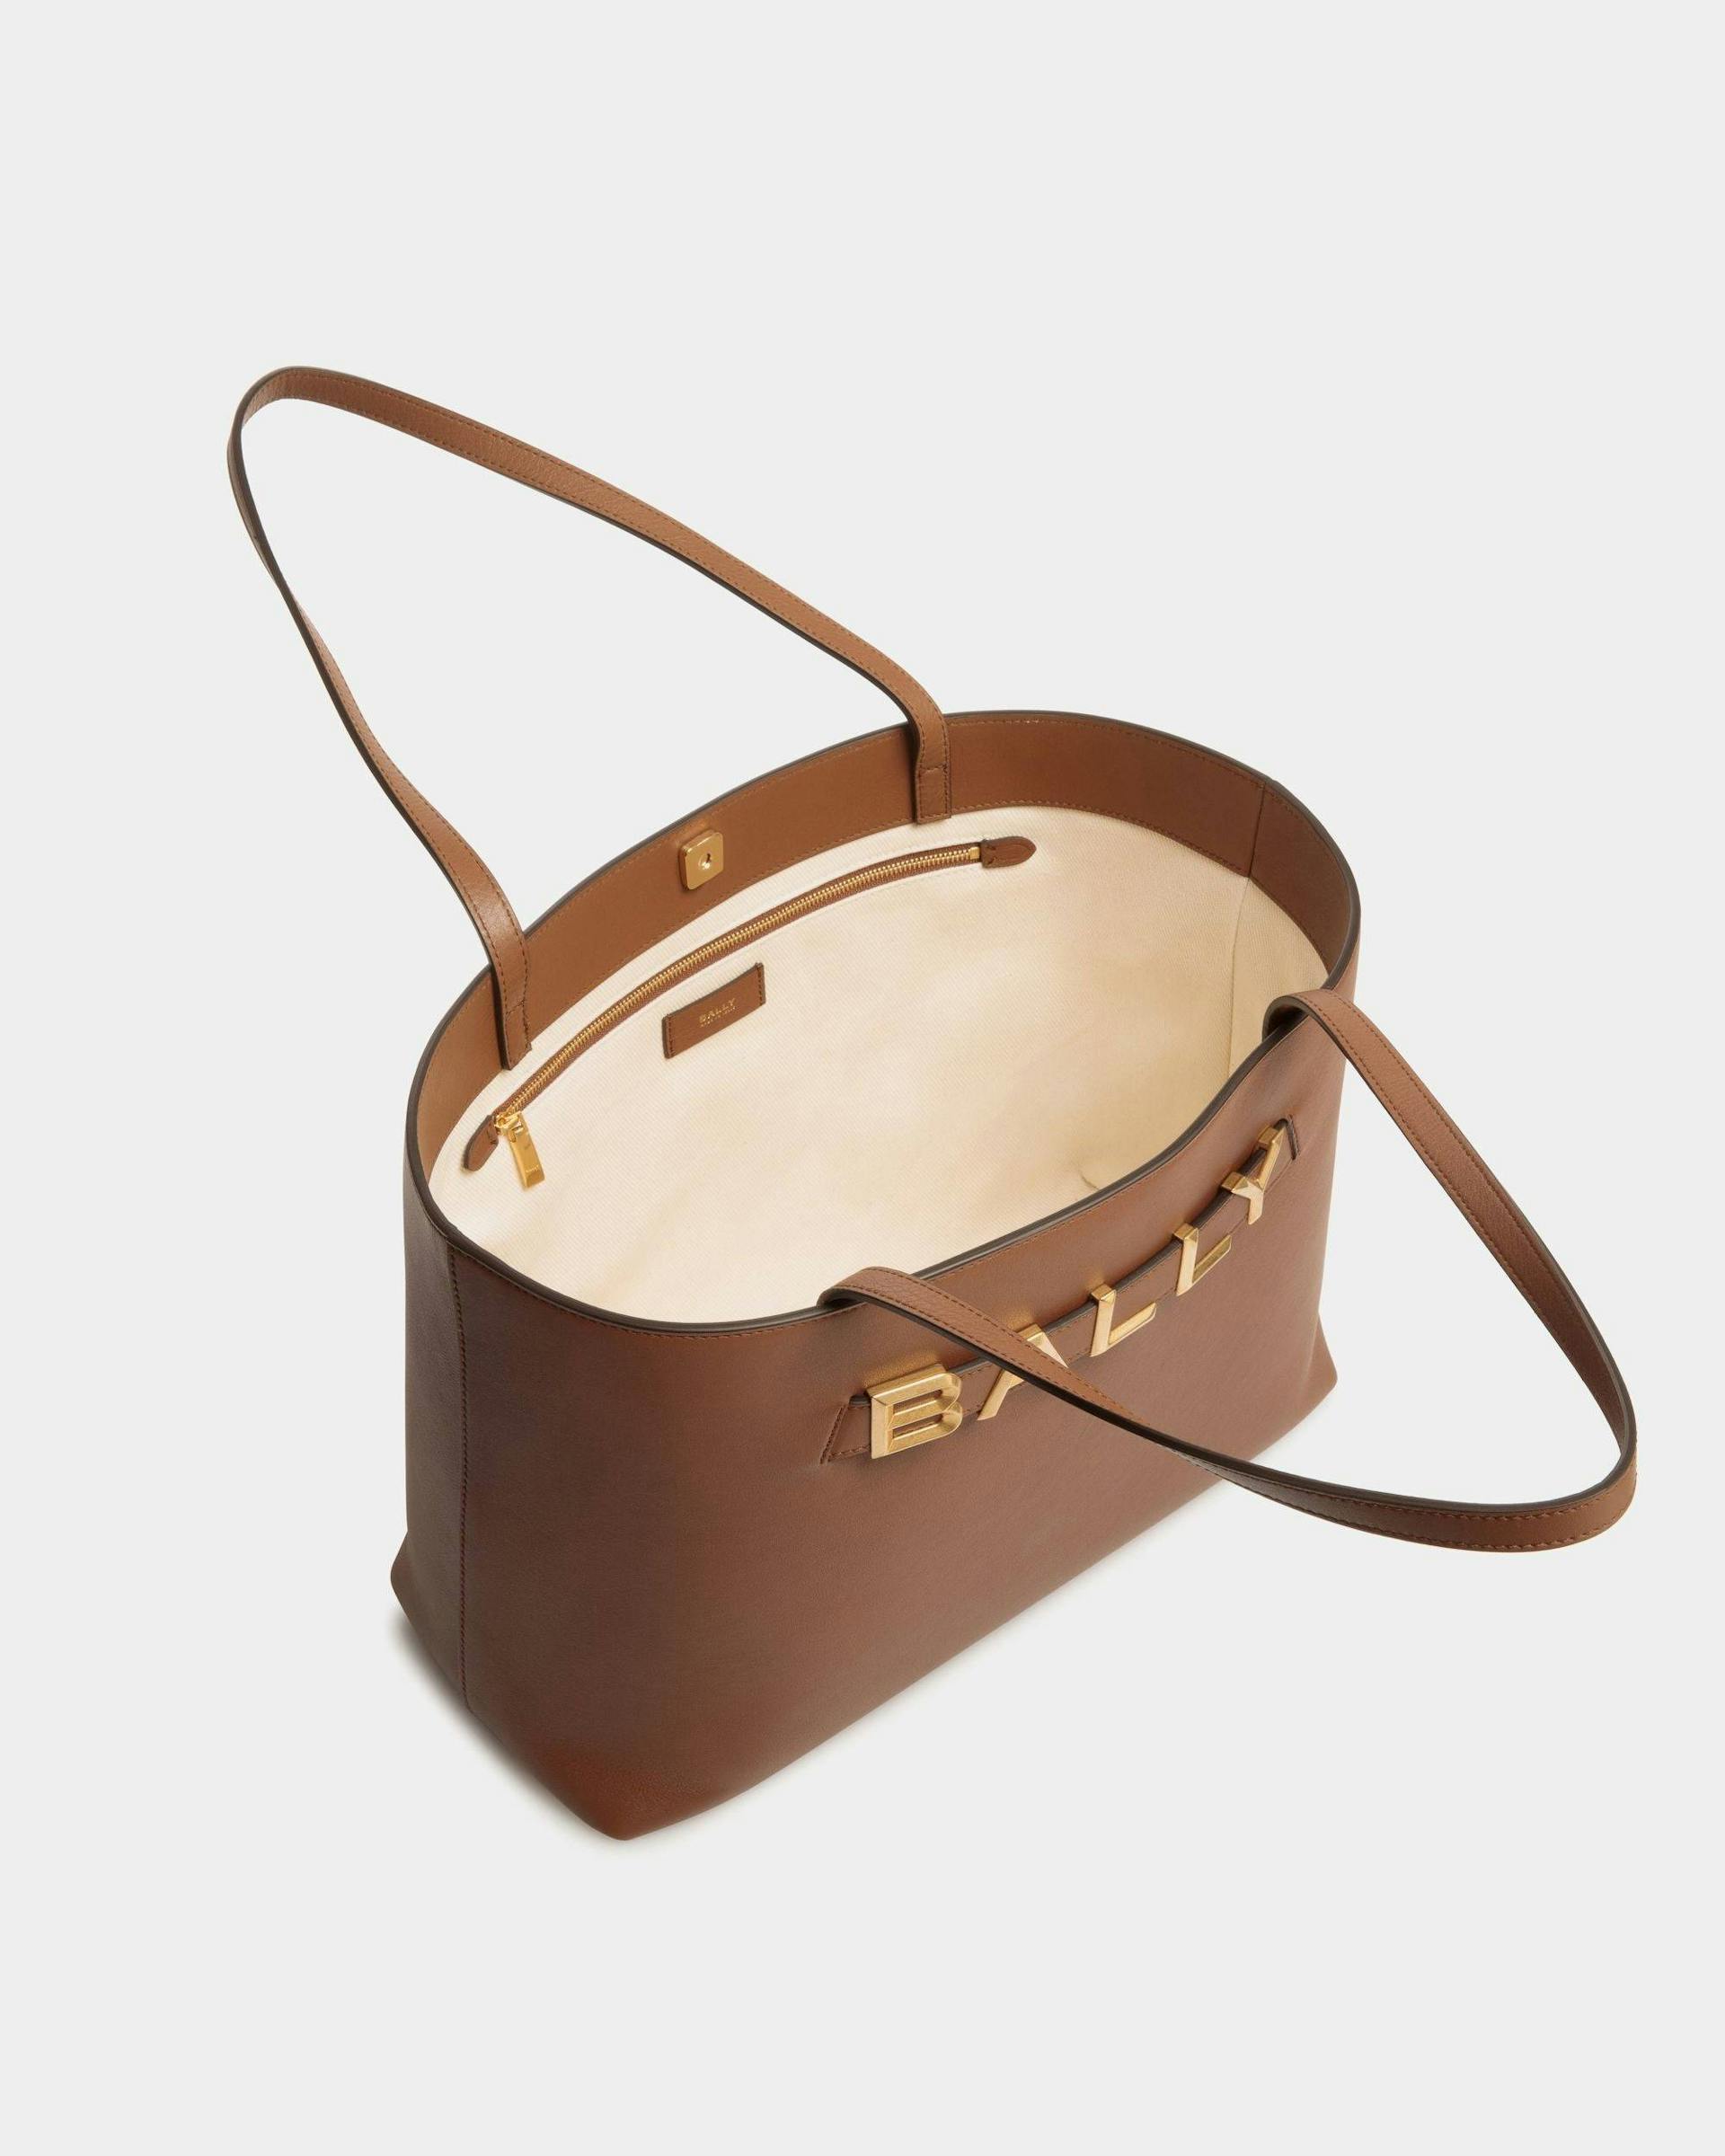 Bally Spell Tote Bag in Brown Leather - Women's - Bally - 04